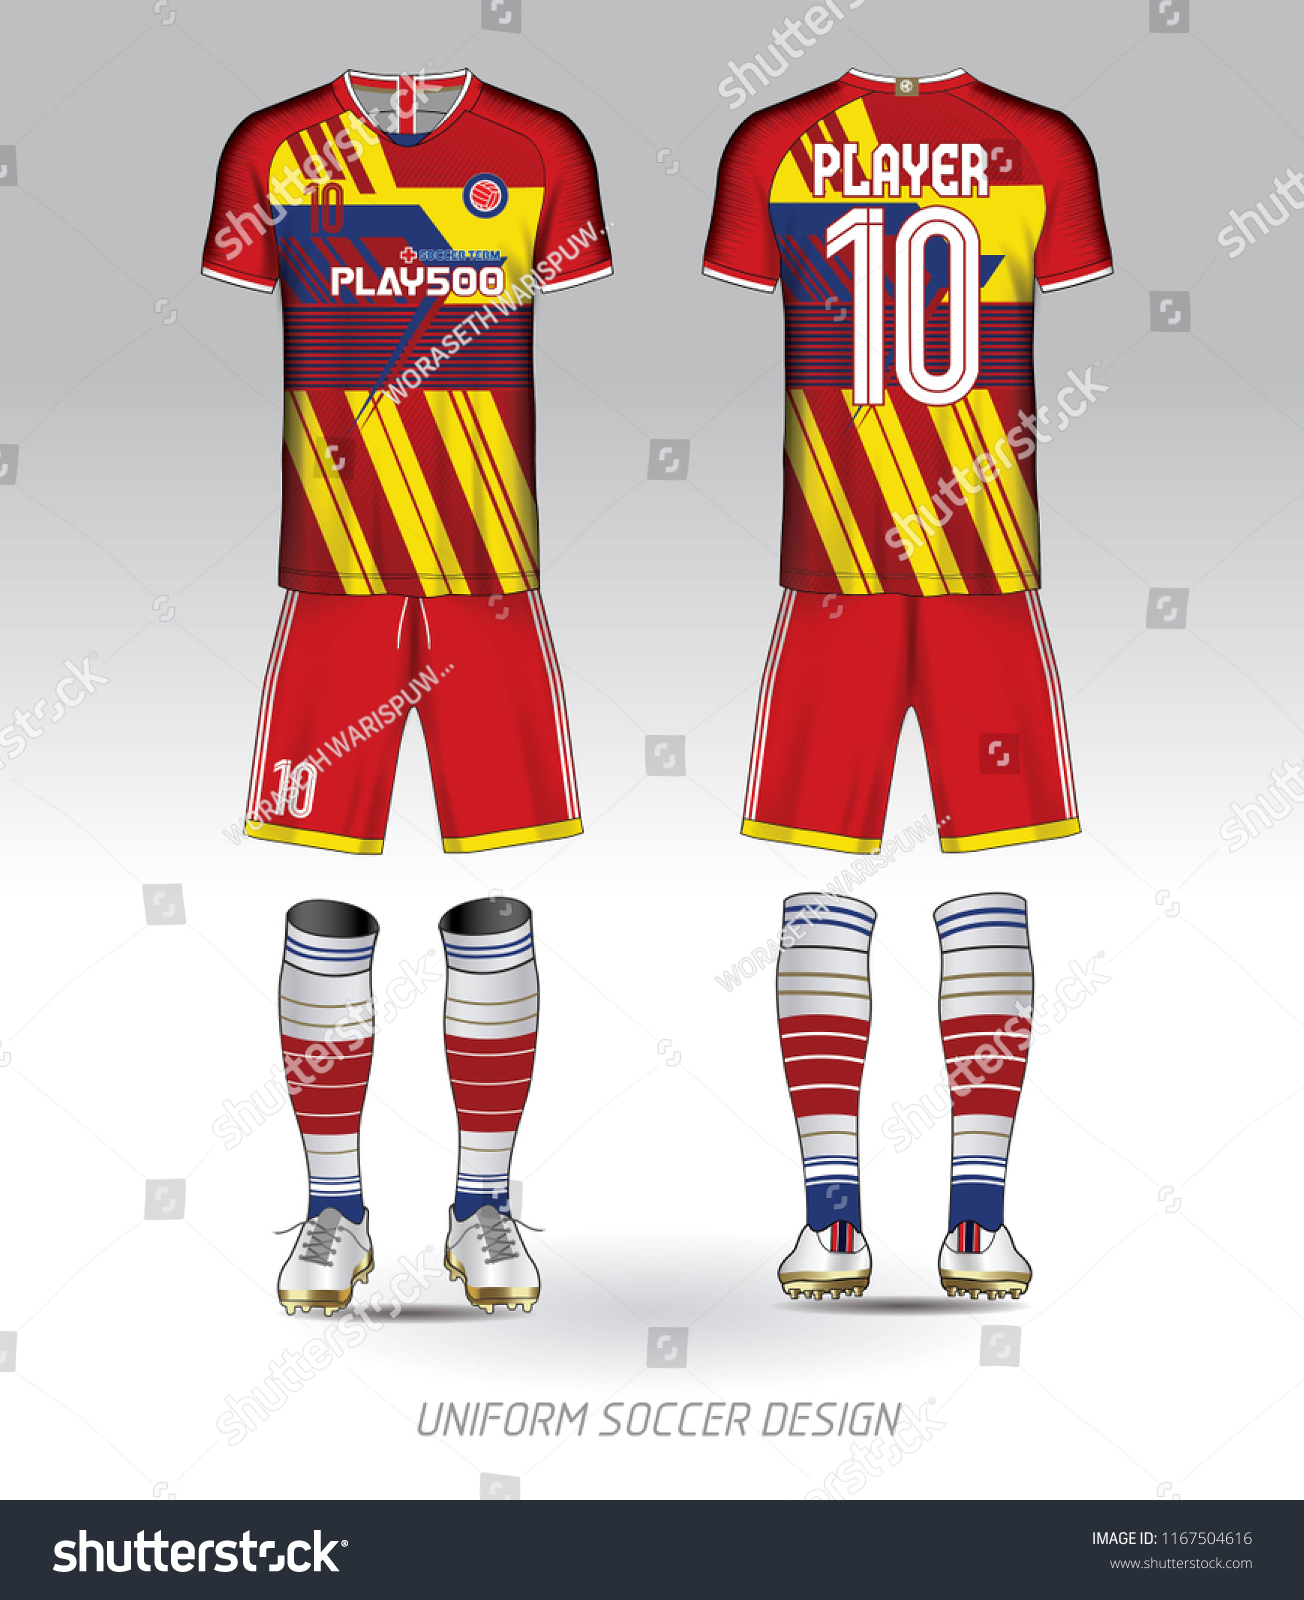 red and yellow football jersey